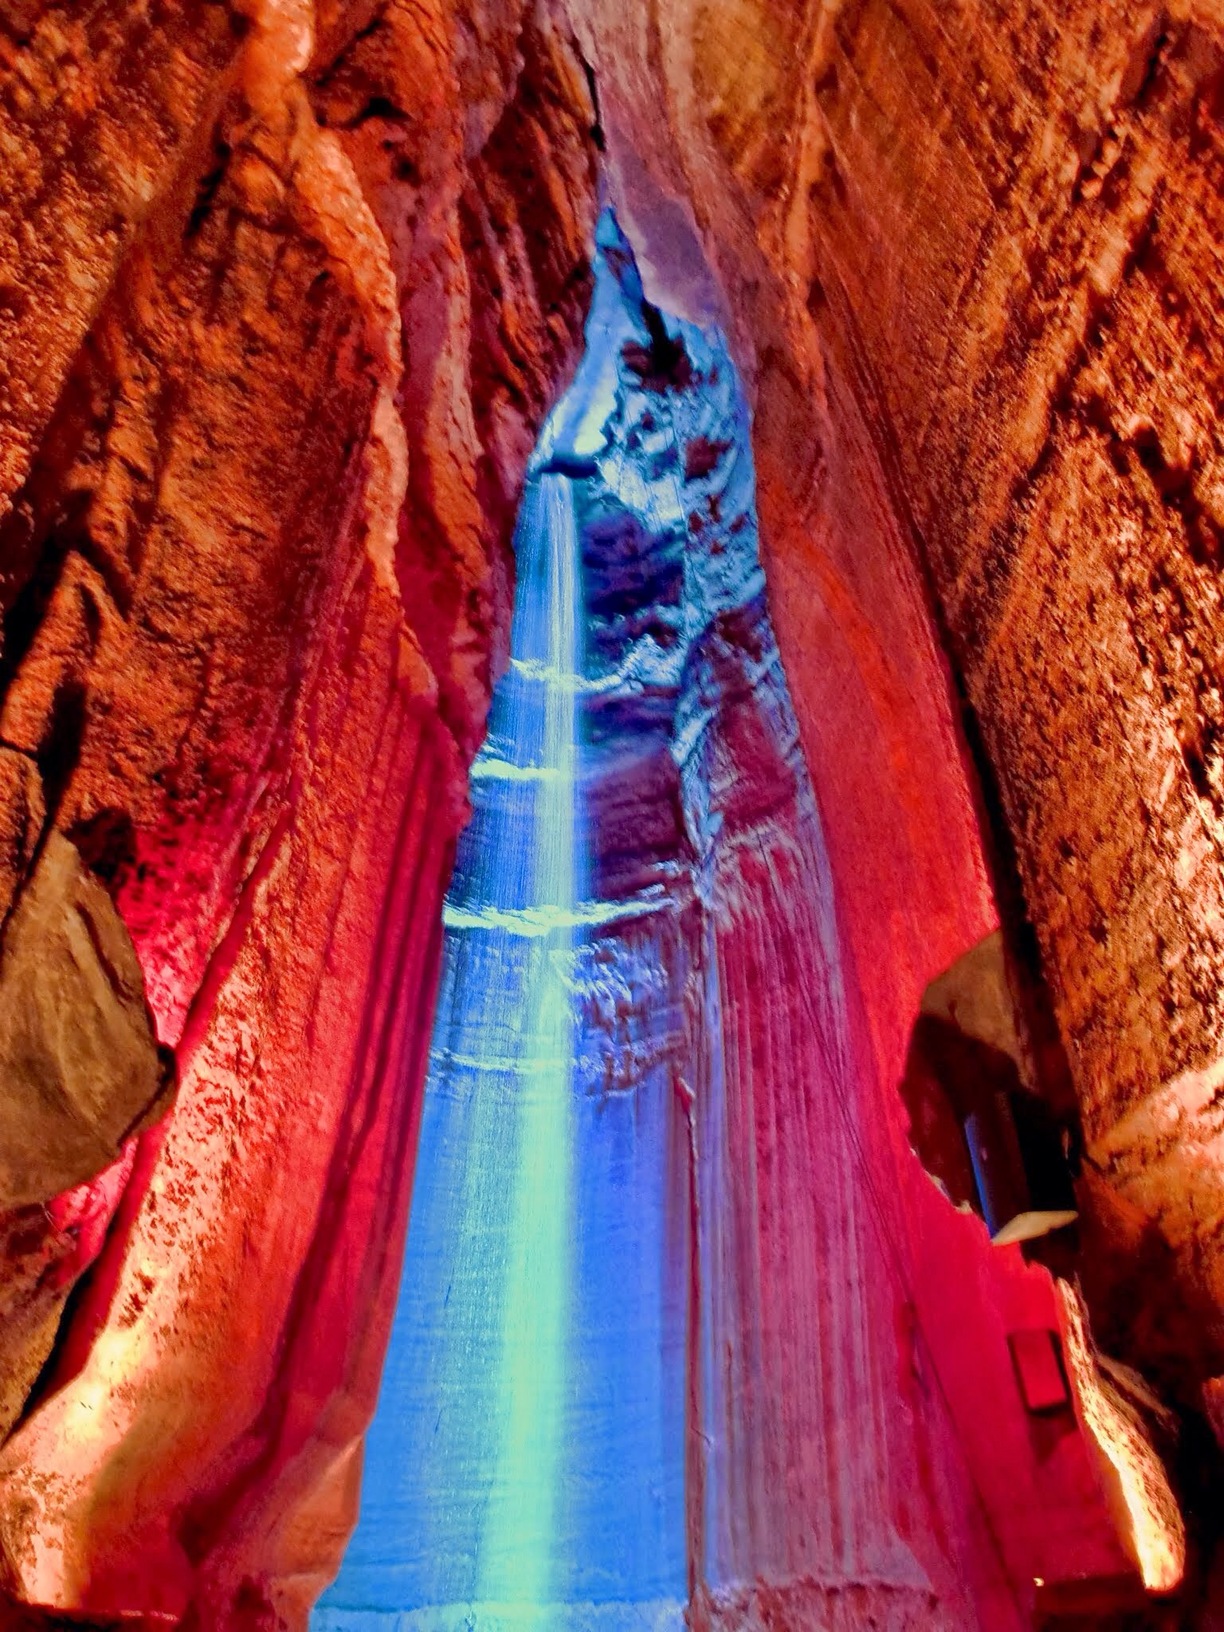 Ruby Falls #Chattanooga, #Tennessee